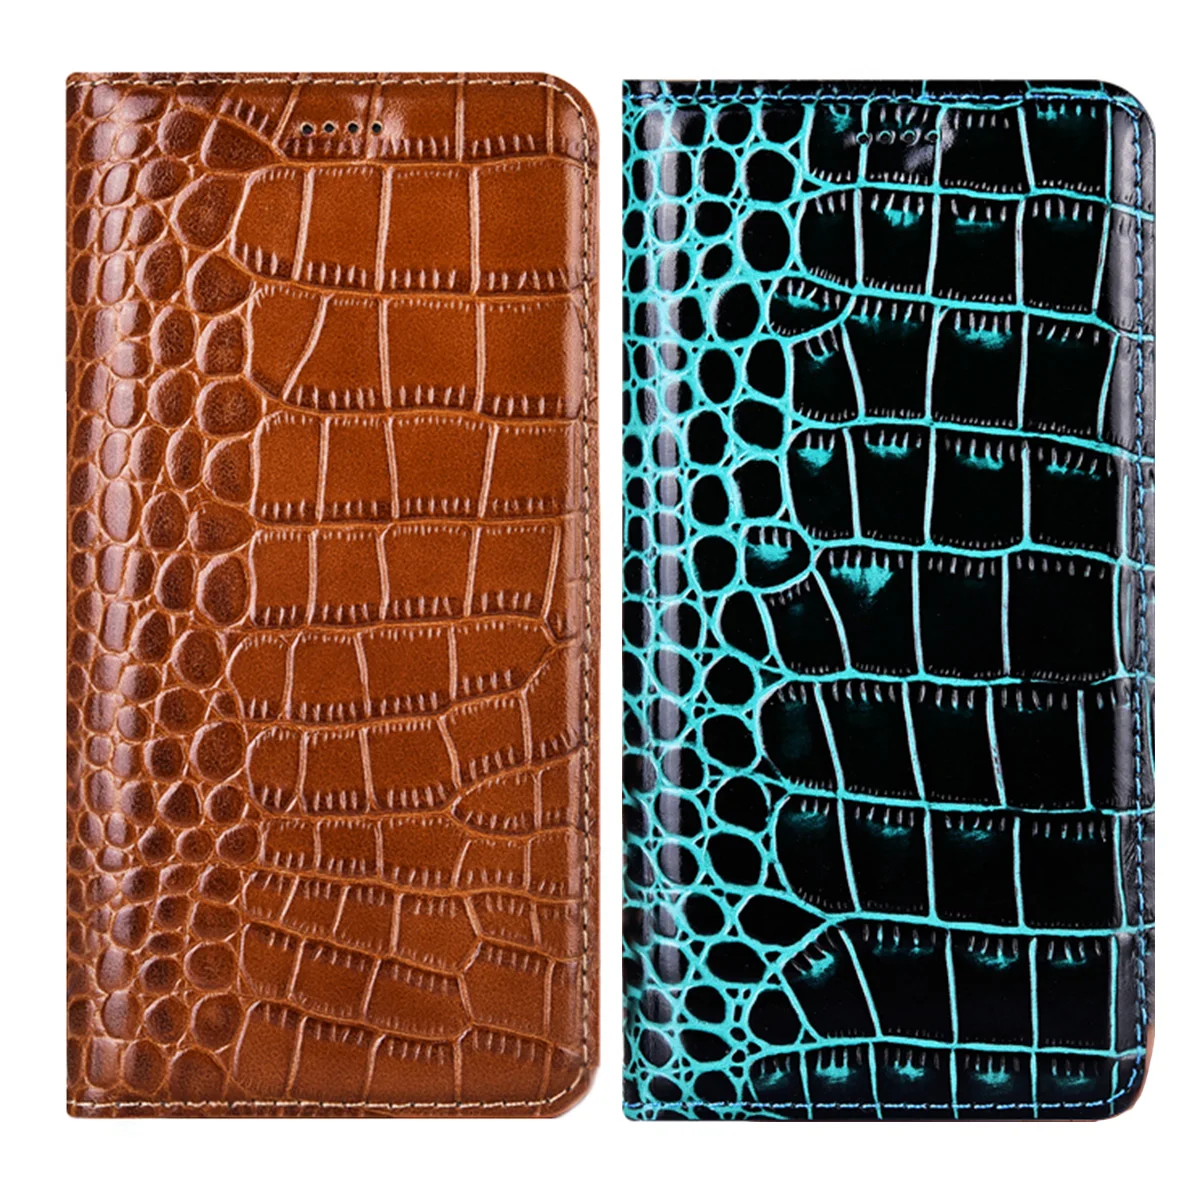 

Luxury Crocodile Genuine Leather Flip Phone Case For Blackview A30 A60 A80 Pro P6000 P2 Lite Cover Case Coque Full Protection